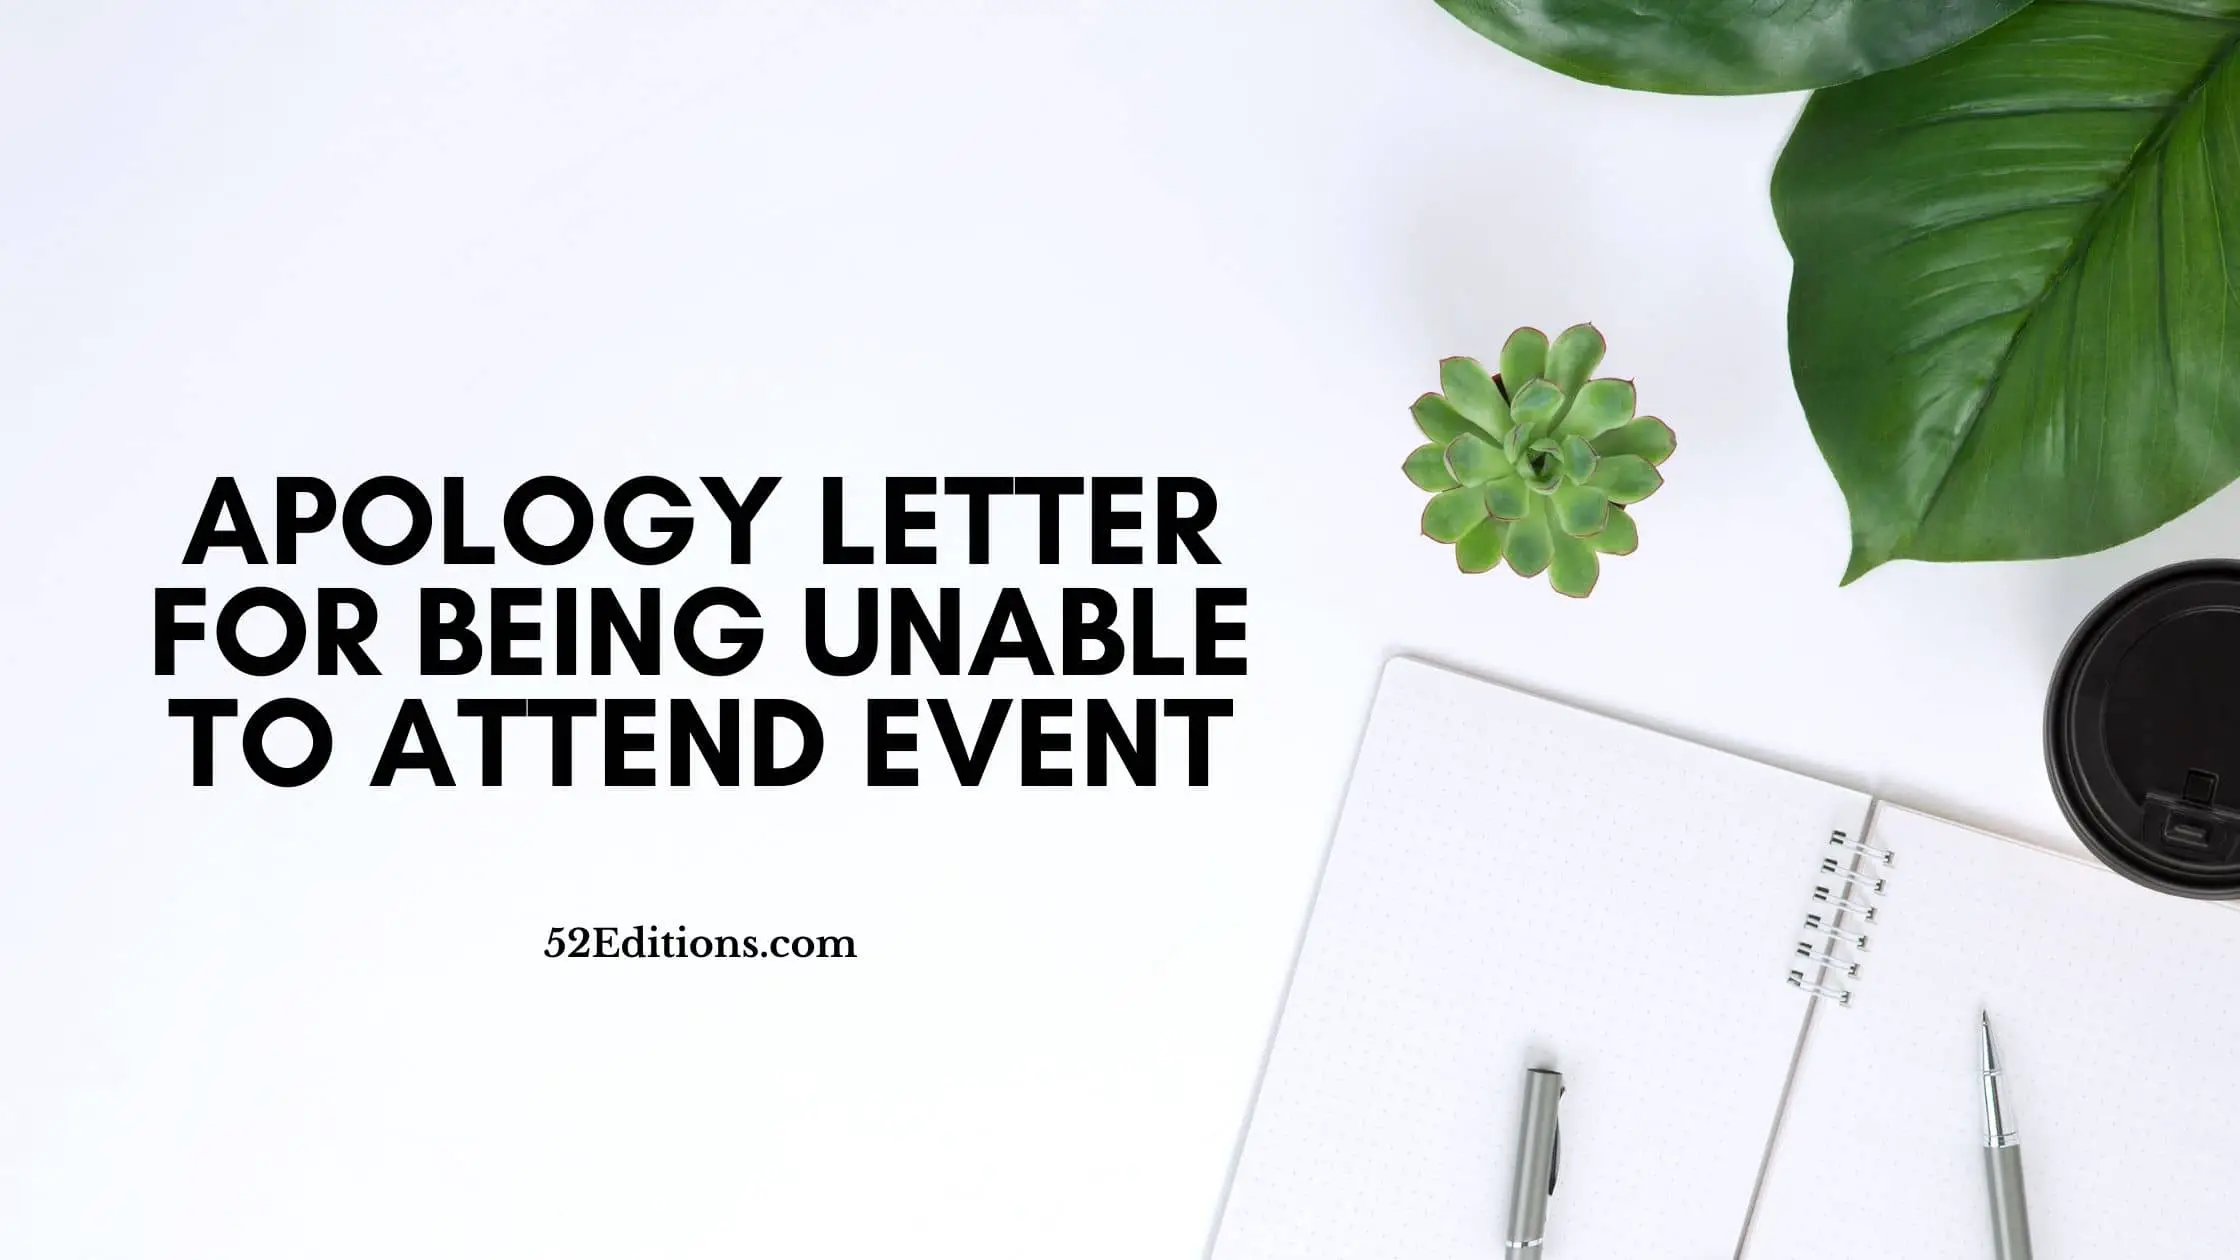 Apology Letter For Being Unable To Attend Event // Get Free Letter Templates (Print Or Download)